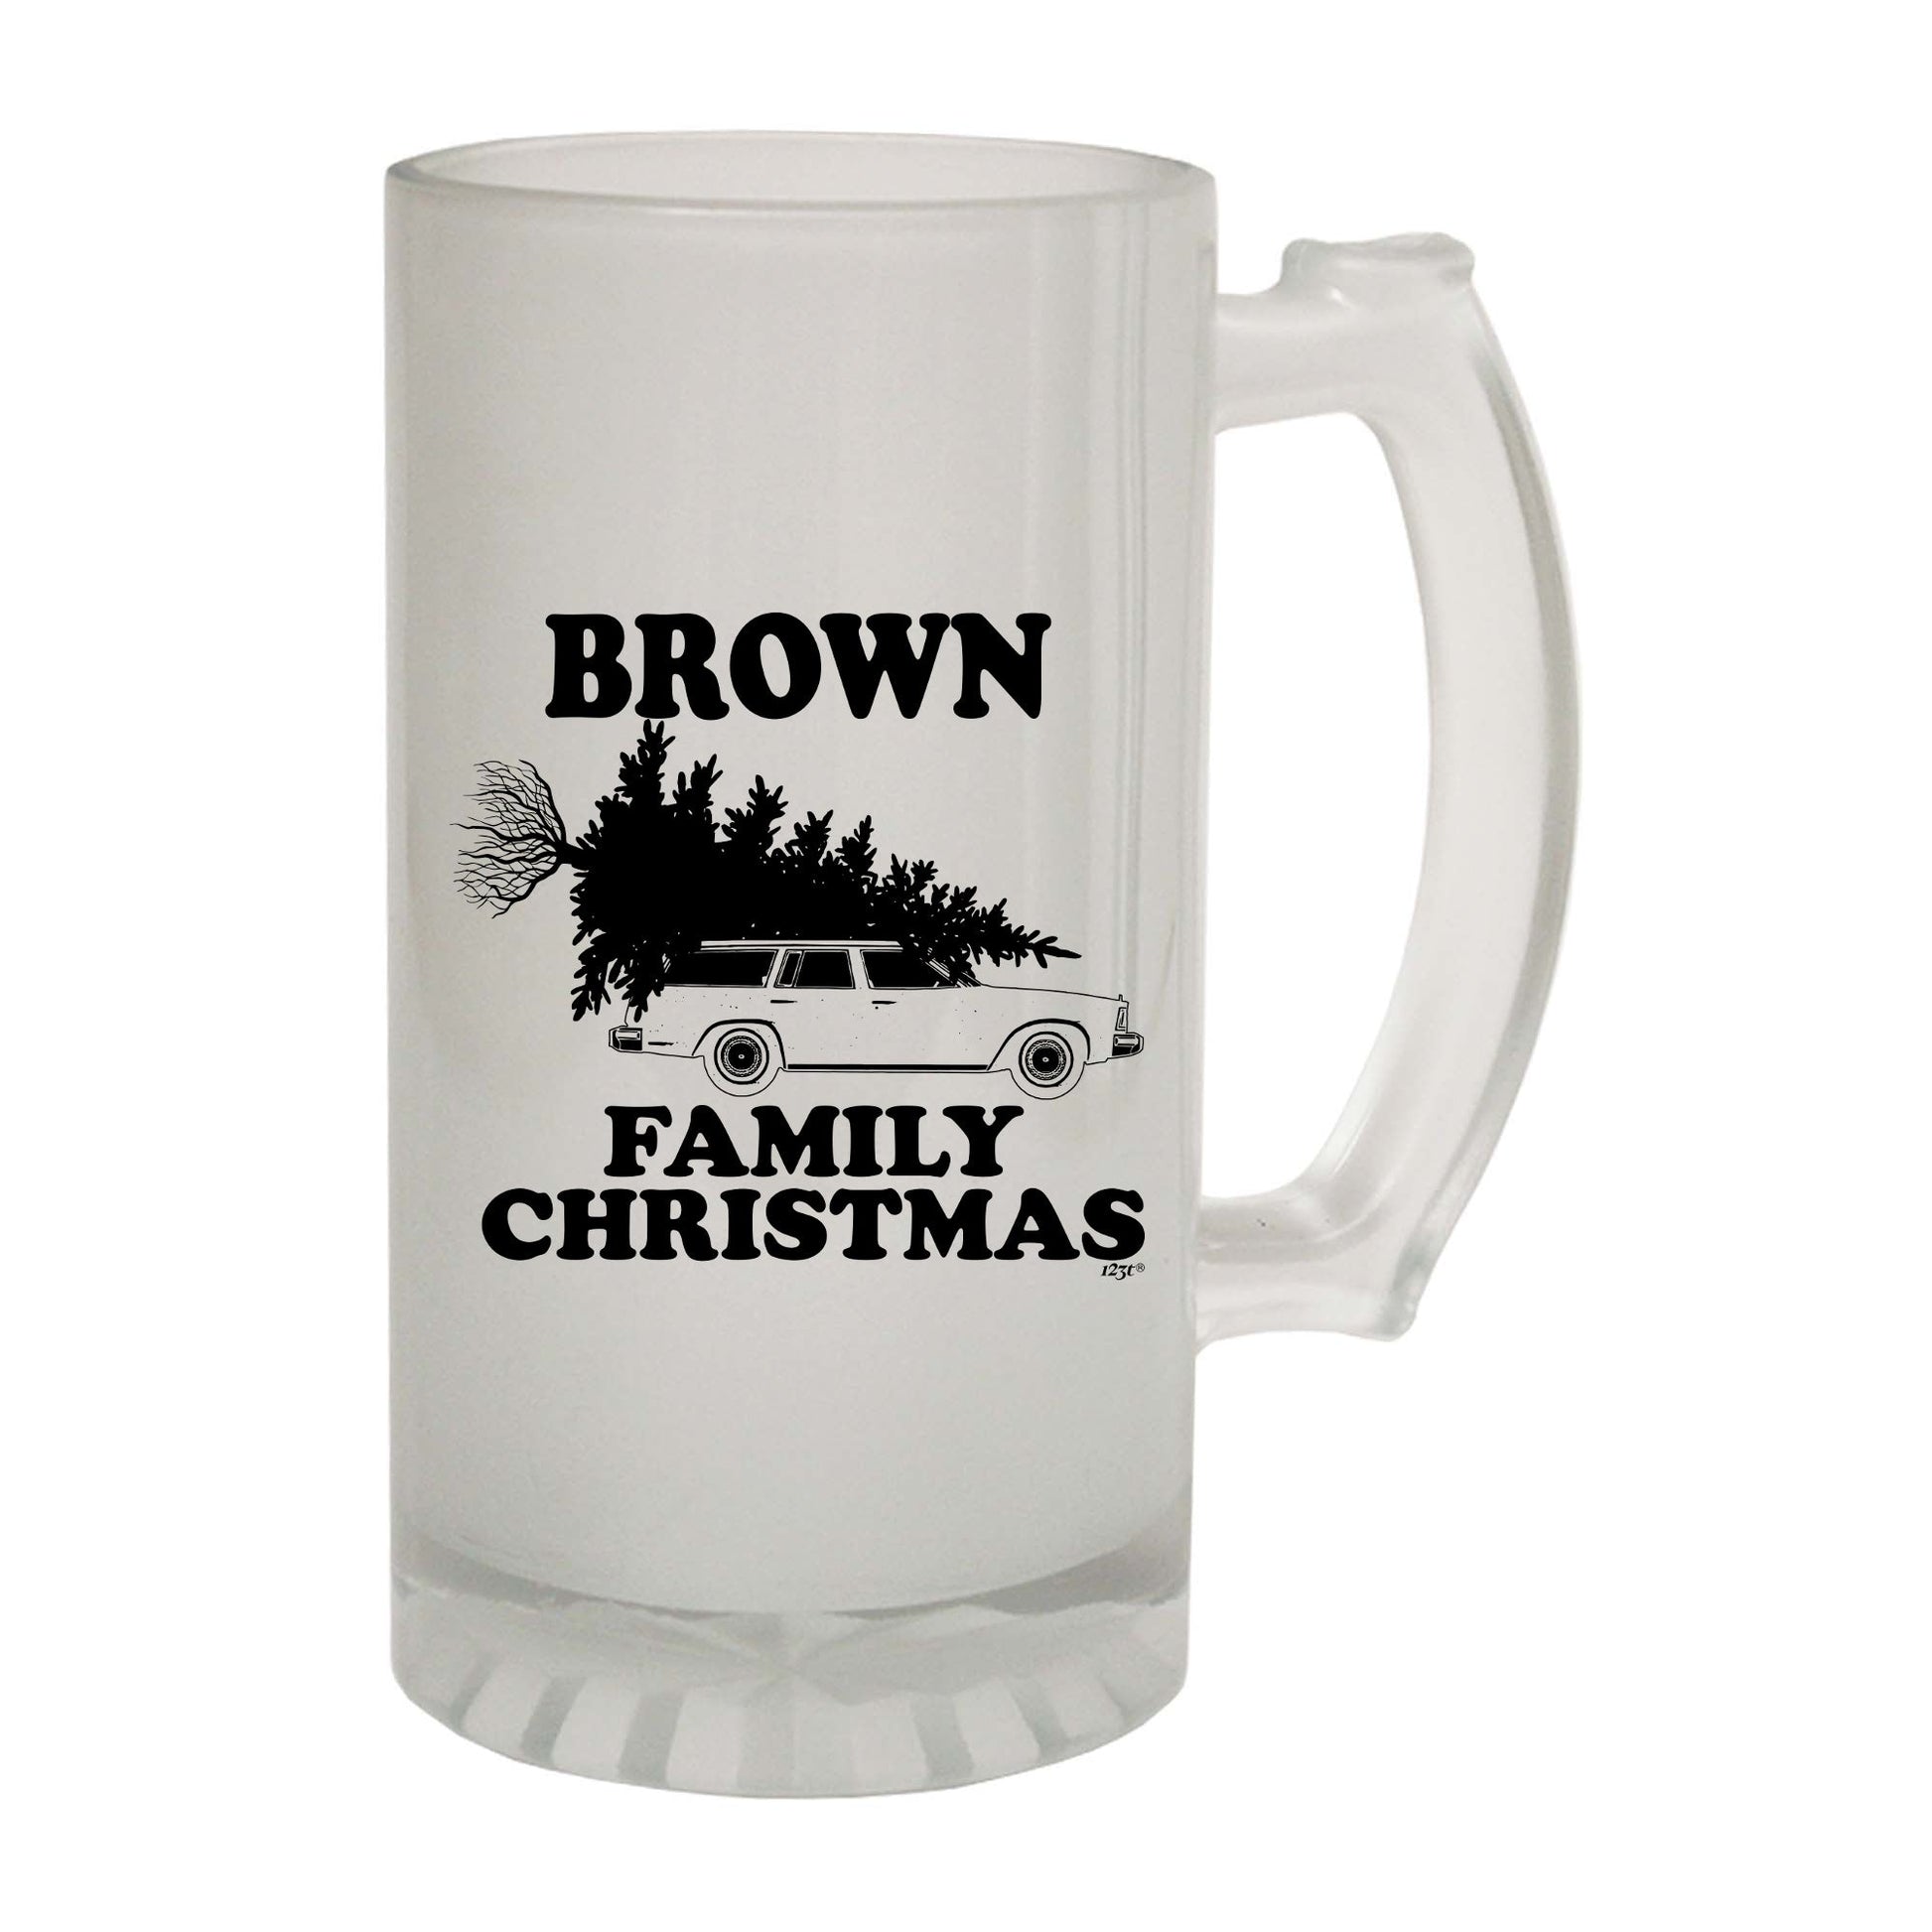 Family Christmas Brown - Funny Beer Stein